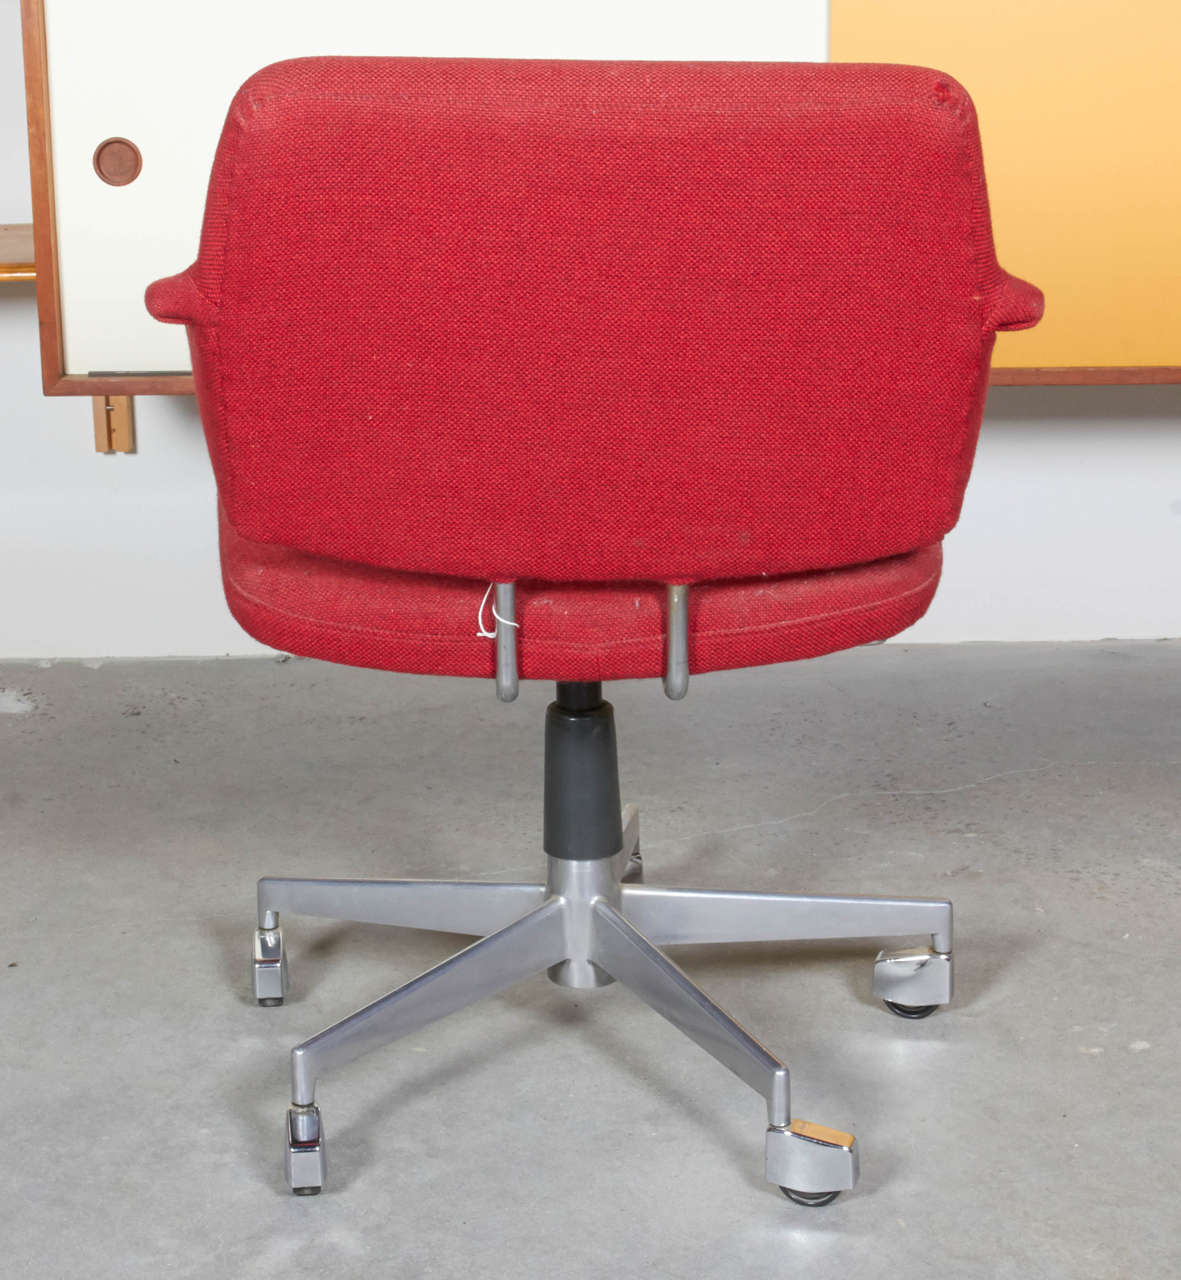 Desk Chair by Kevi on Casters, Danish 1